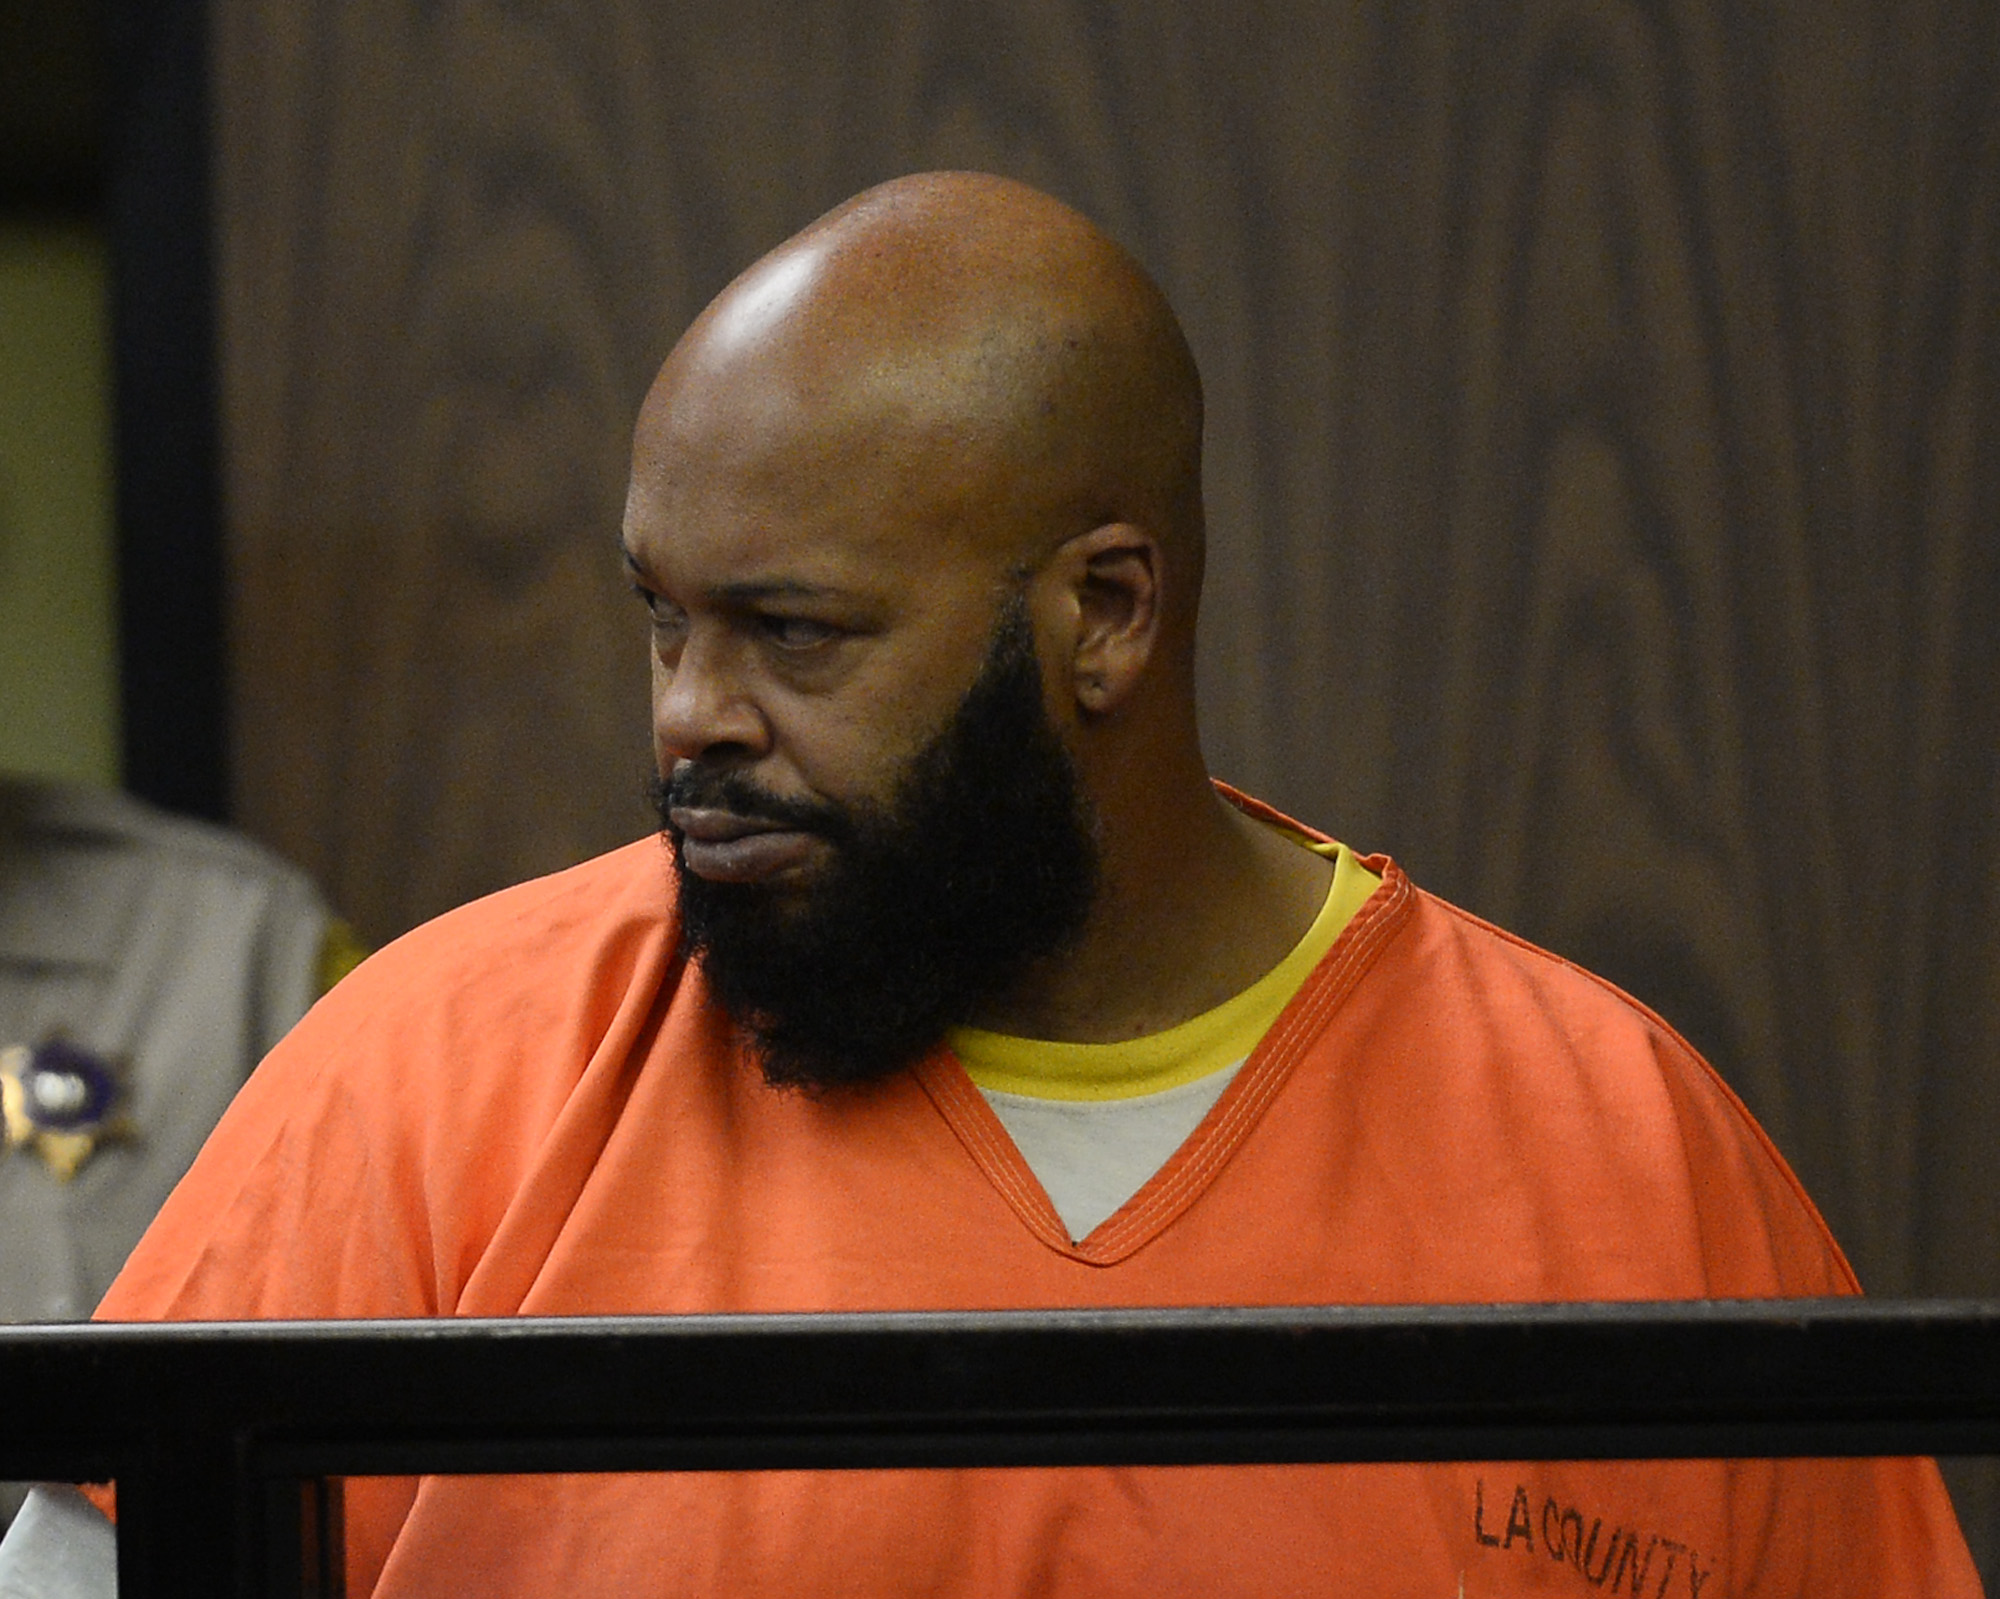 Marion "Suge" Knight appears in a court during his arraignment, Tuesday, Feb. 3, 2015 in Compton, Calif.